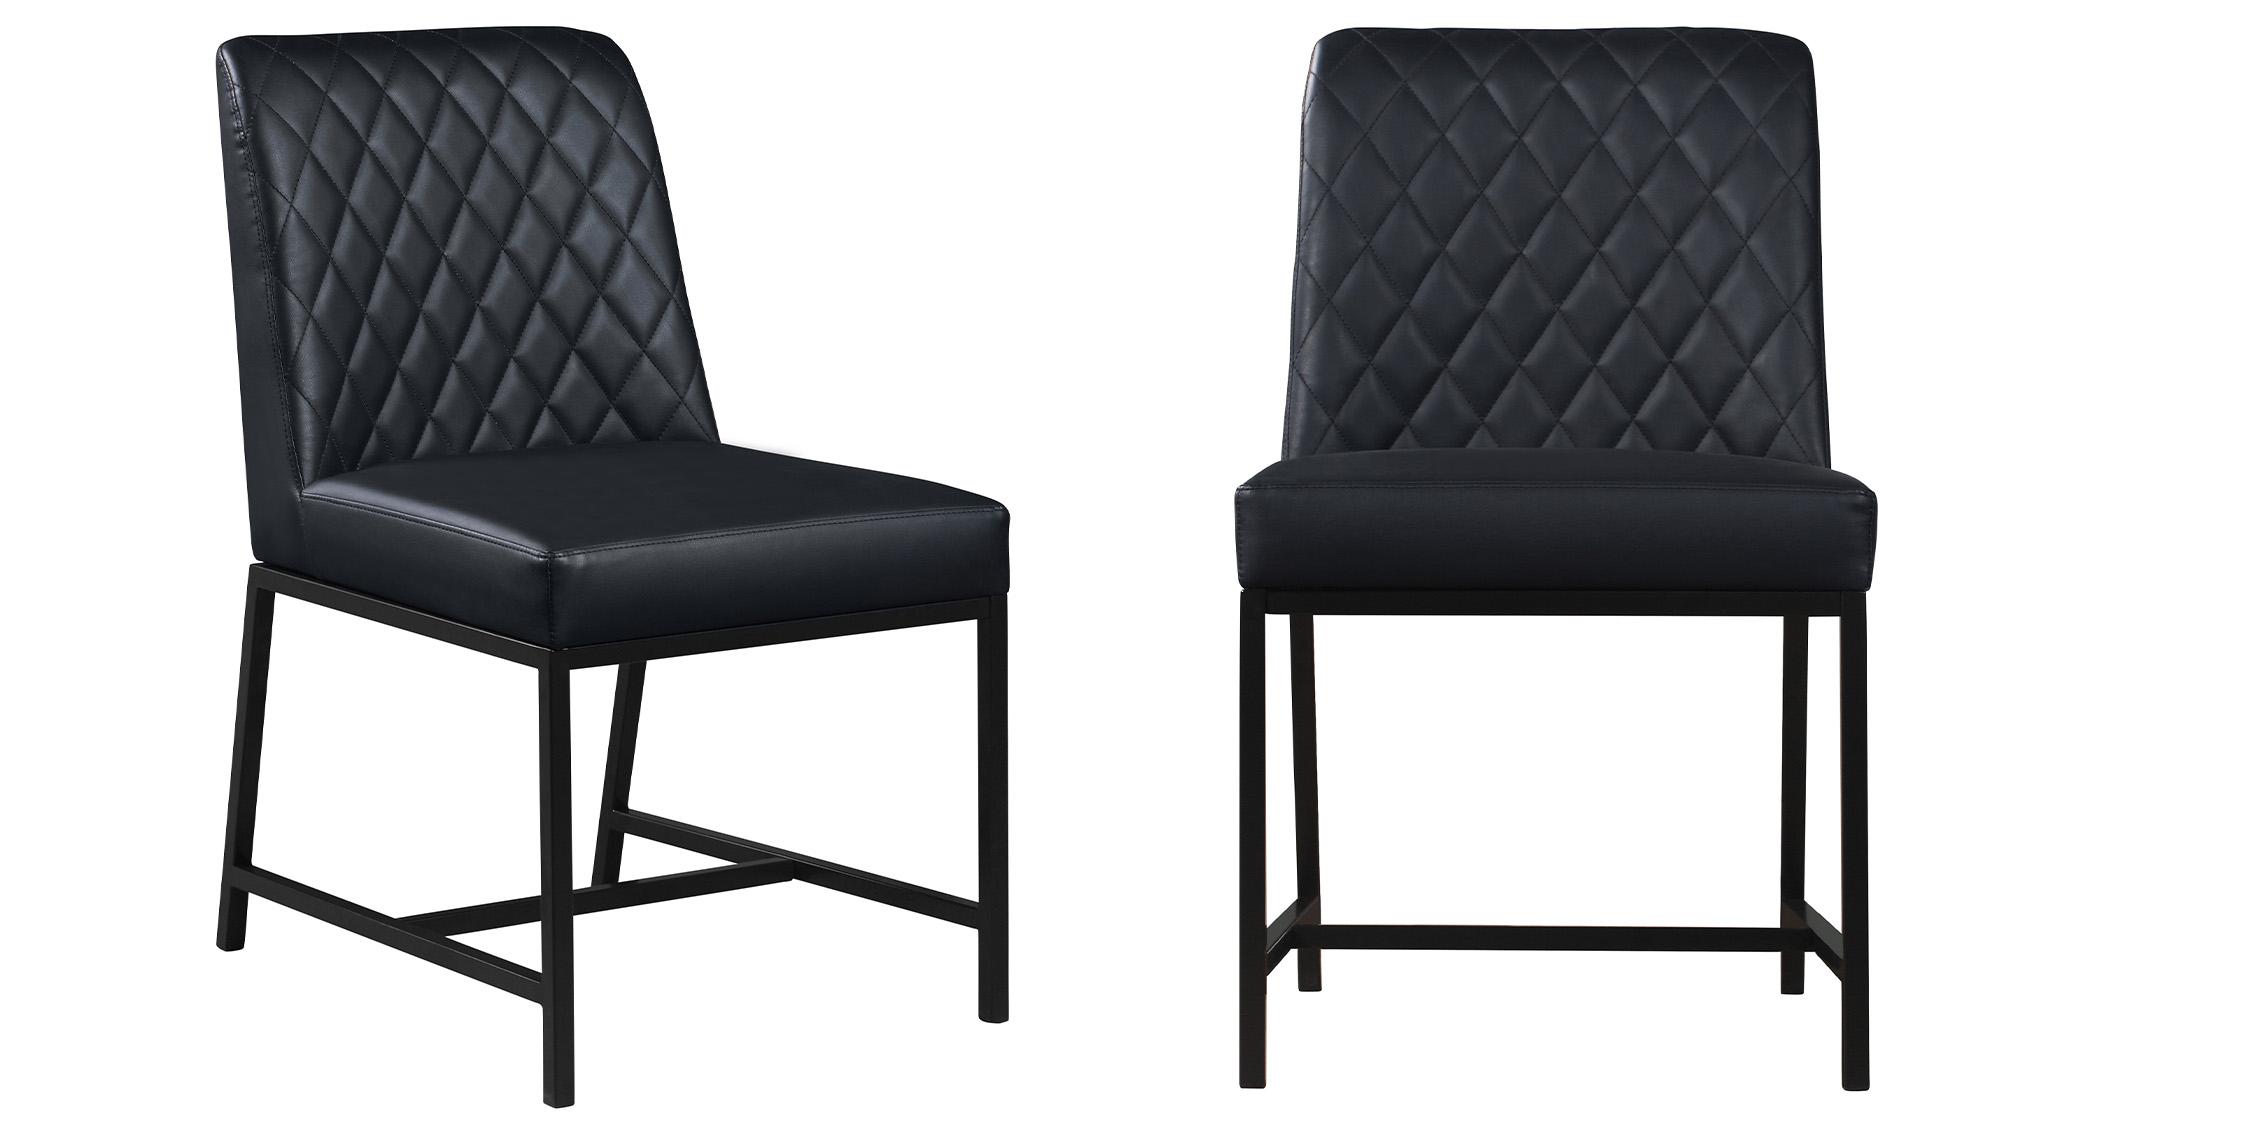 Contemporary, Modern Dining Chair Set BRYCE 918Black 918Black-C-Set-2 in Black Faux Leather